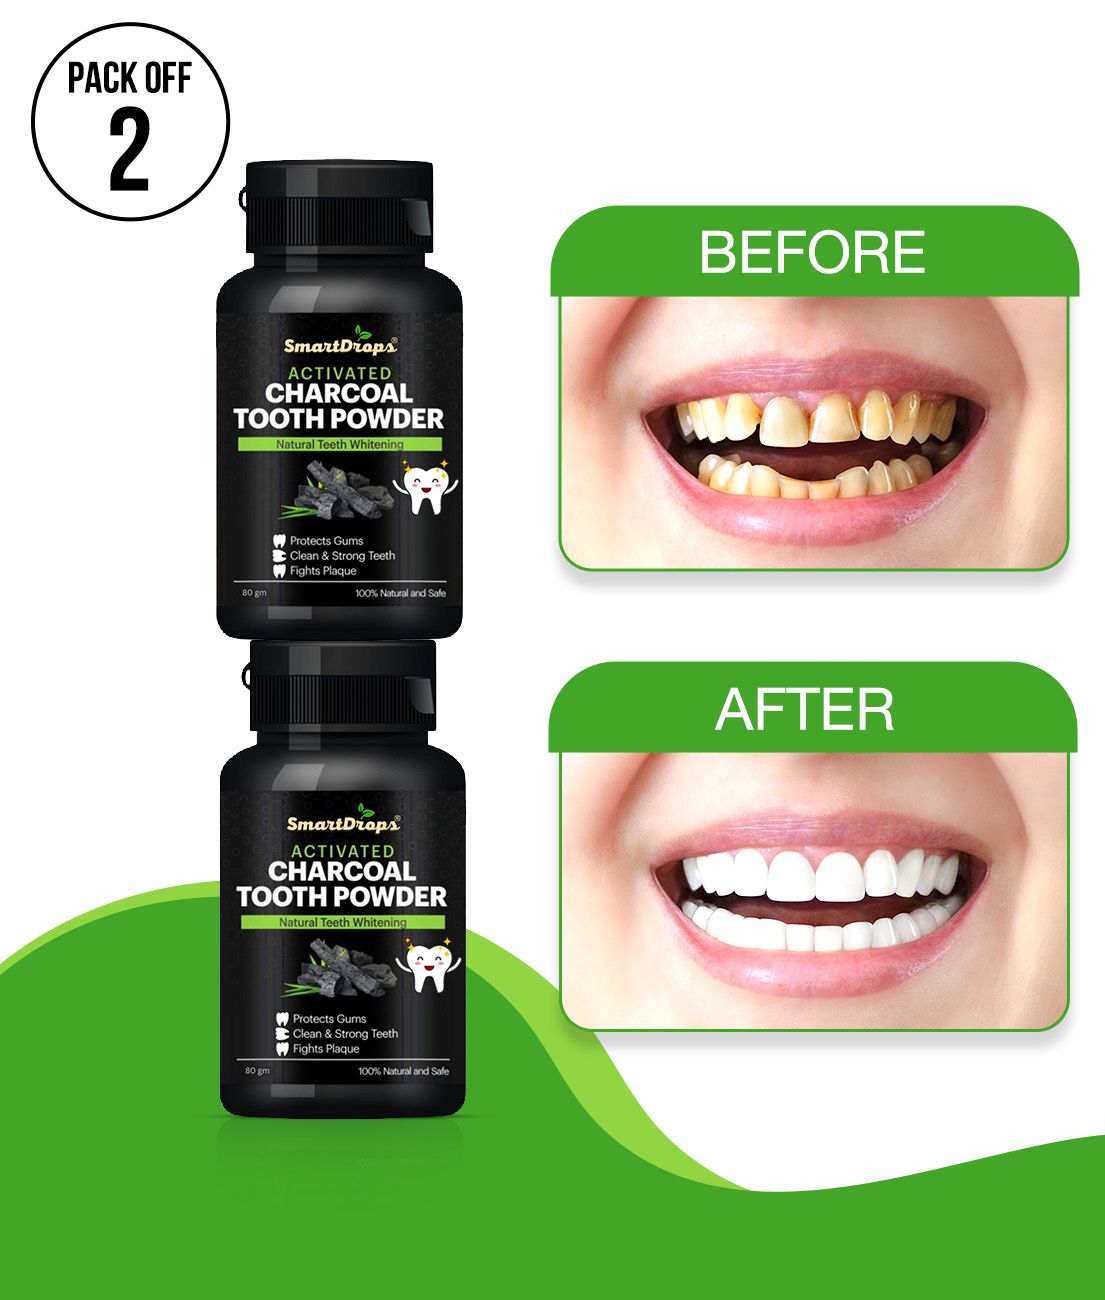     			Smartdrops Activated Charcoal Teeth Powder For Teeth Whitening Powder 80gm Pack of 2